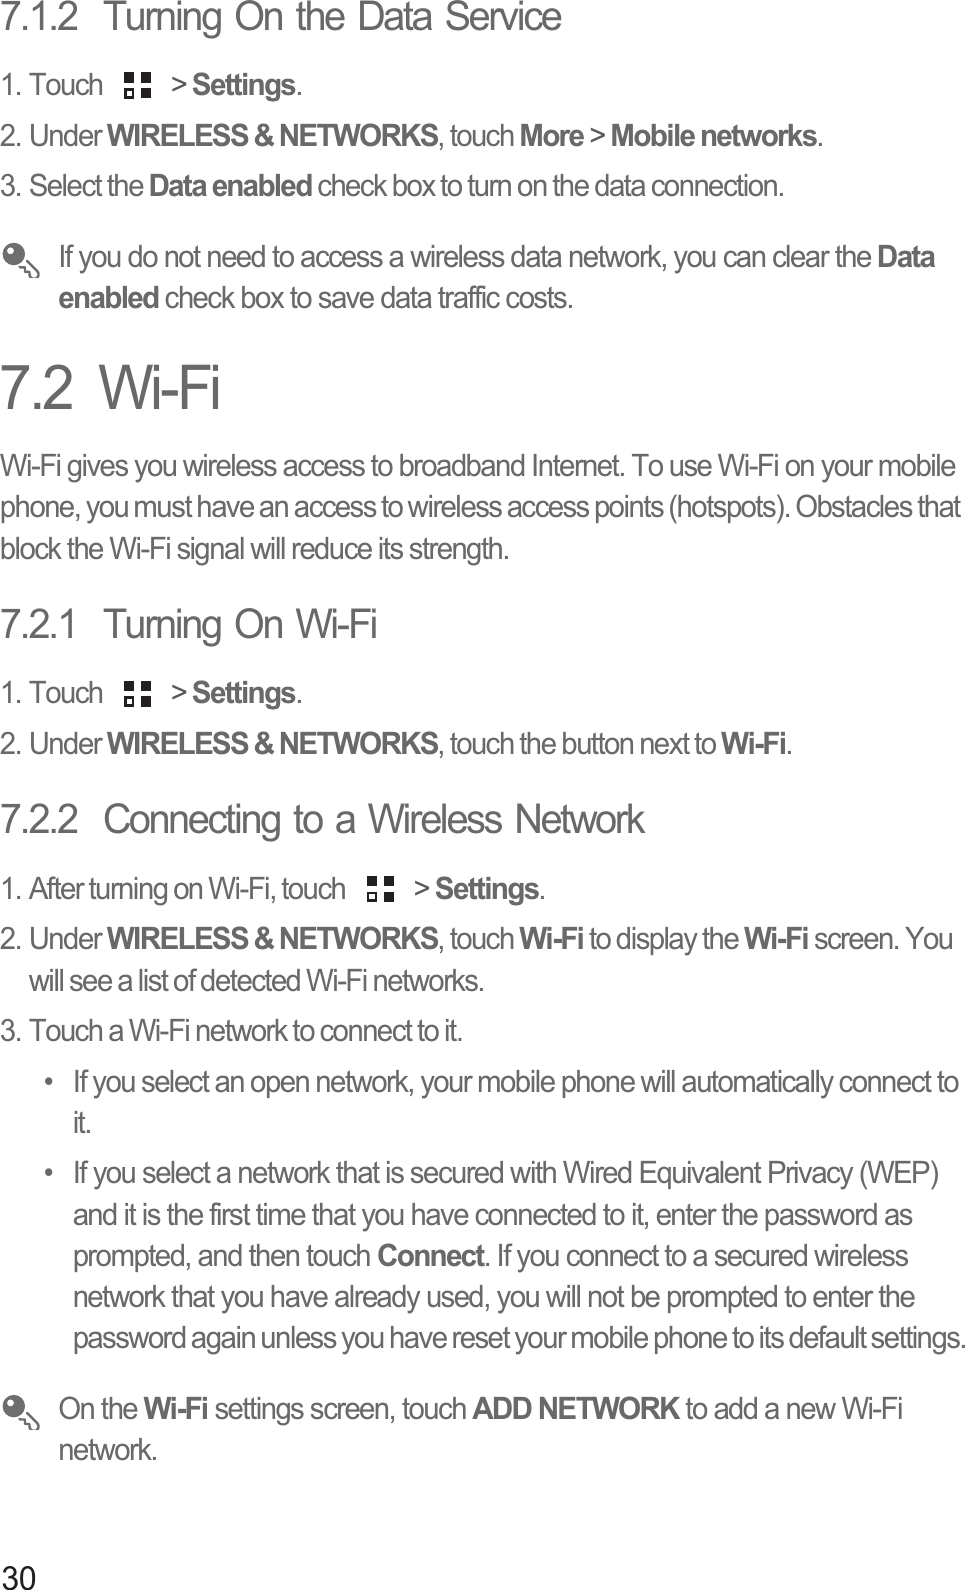 307.1.2  Turning On the Data Service1. Touch   &gt; Settings.2. Under WIRELESS &amp; NETWORKS, touch More &gt; Mobile networks. 3. Select the Data enabled check box to turn on the data connection. If you do not need to access a wireless data network, you can clear the Data enabled check box to save data traffic costs.7.2  Wi-FiWi-Fi gives you wireless access to broadband Internet. To use Wi-Fi on your mobile phone, you must have an access to wireless access points (hotspots). Obstacles that block the Wi-Fi signal will reduce its strength.7.2.1  Turning On Wi-Fi1. Touch   &gt; Settings.2. Under WIRELESS &amp; NETWORKS, touch the button next to Wi-Fi.7.2.2  Connecting to a Wireless Network1. After turning on Wi-Fi, touch   &gt; Settings.2. Under WIRELESS &amp; NETWORKS, touch Wi-Fi to display the Wi-Fi screen. You will see a list of detected Wi-Fi networks. 3. Touch a Wi-Fi network to connect to it.•  If you select an open network, your mobile phone will automatically connect to it. •  If you select a network that is secured with Wired Equivalent Privacy (WEP) and it is the first time that you have connected to it, enter the password as prompted, and then touch Connect. If you connect to a secured wireless network that you have already used, you will not be prompted to enter the password again unless you have reset your mobile phone to its default settings. On the Wi-Fi settings screen, touch ADD NETWORK to add a new Wi-Fi network. 